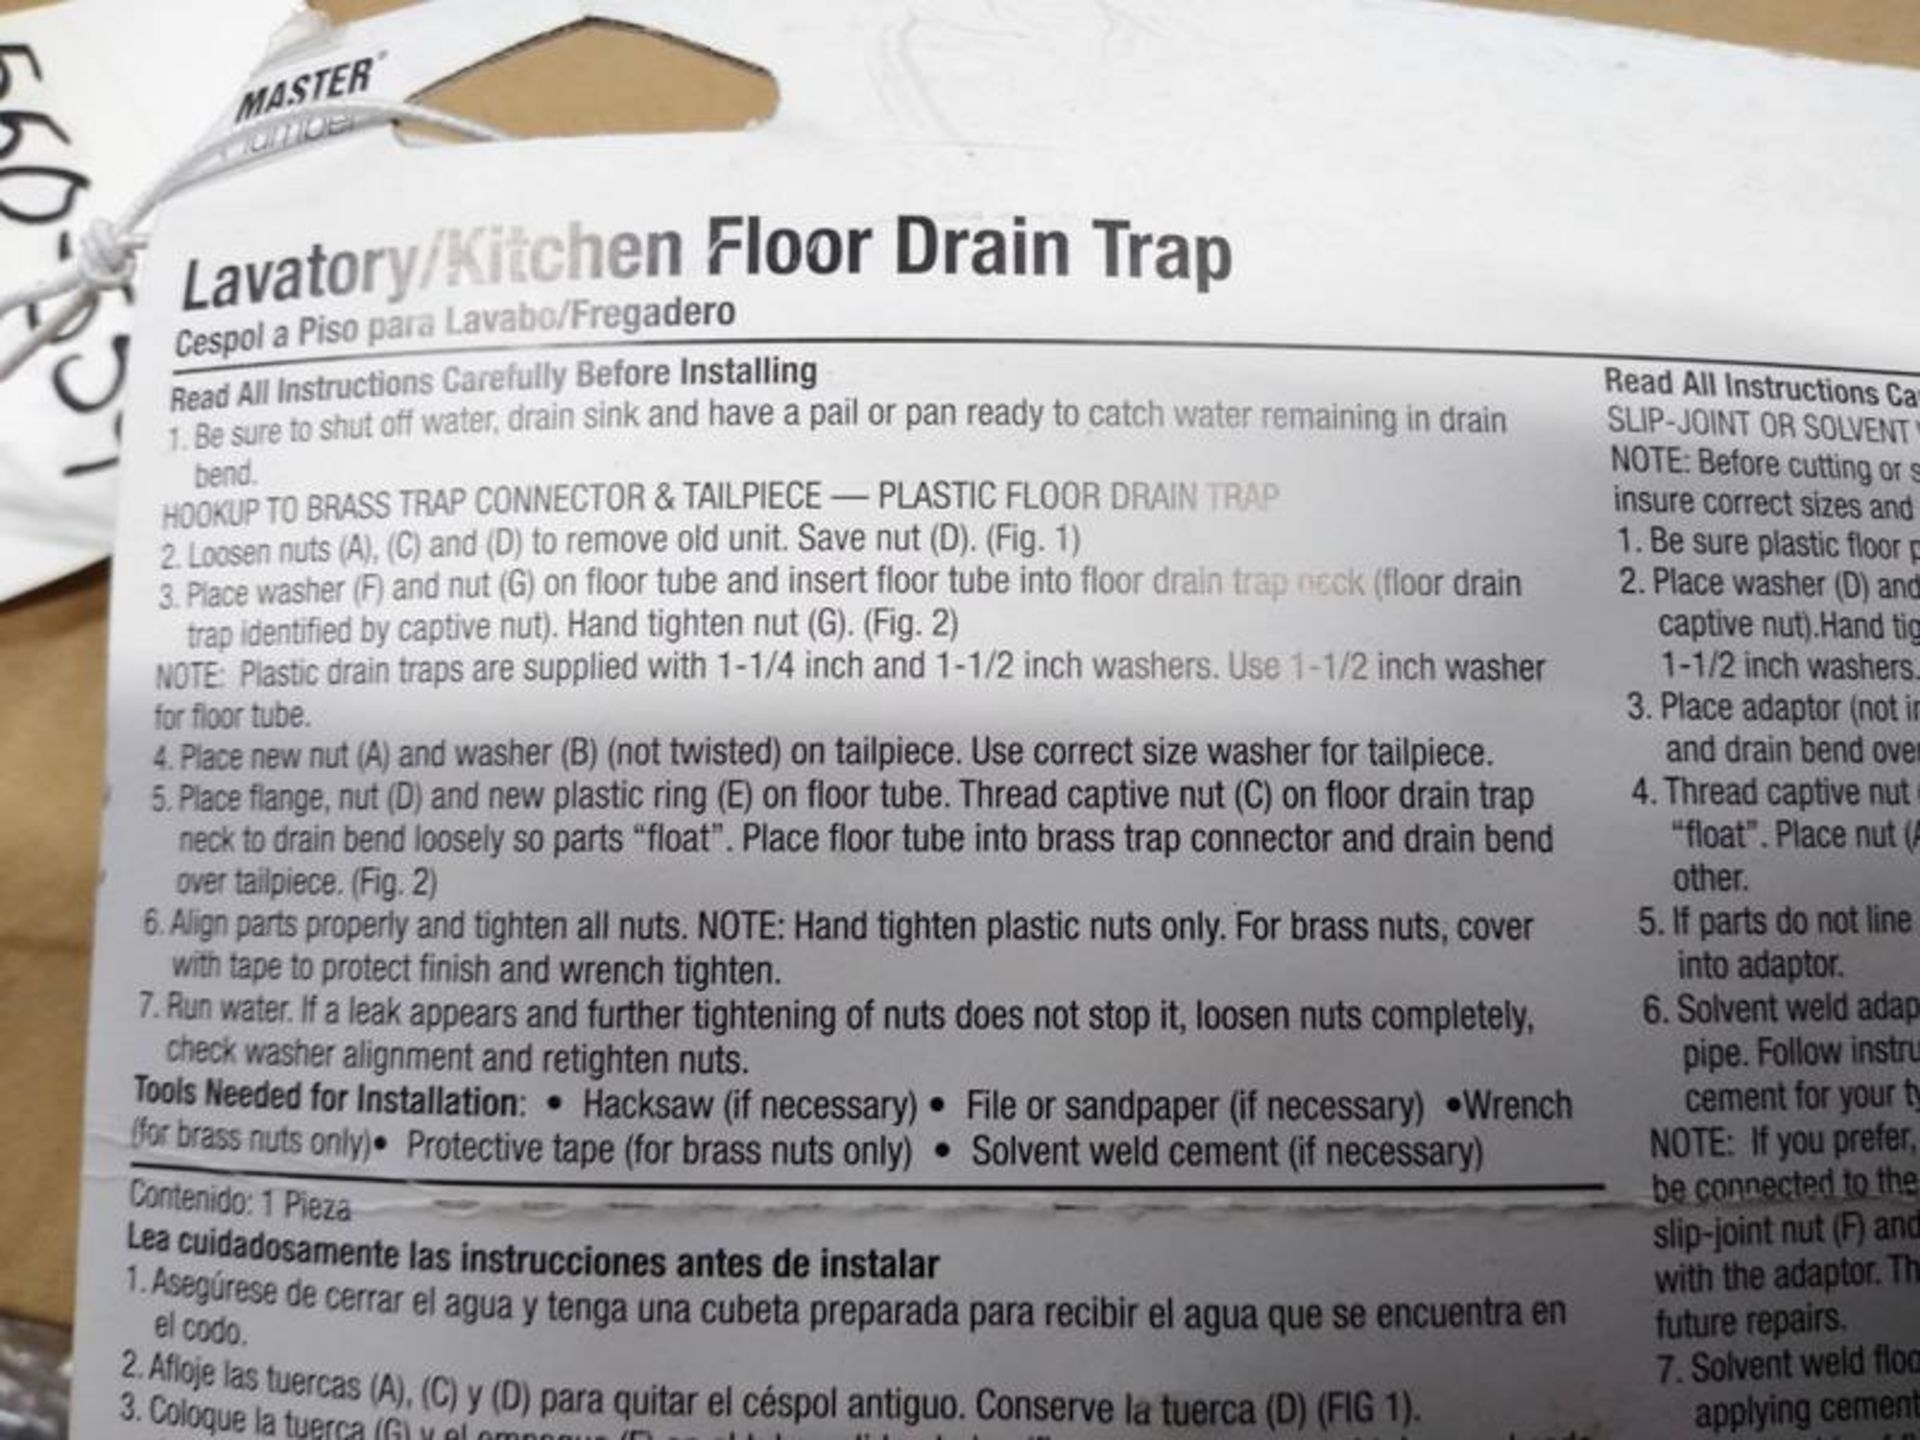 LOT OF 100 MASTER PLUMBER LAVATORY / KITCHEN FLOOR DRAIN TRAP - Image 5 of 8